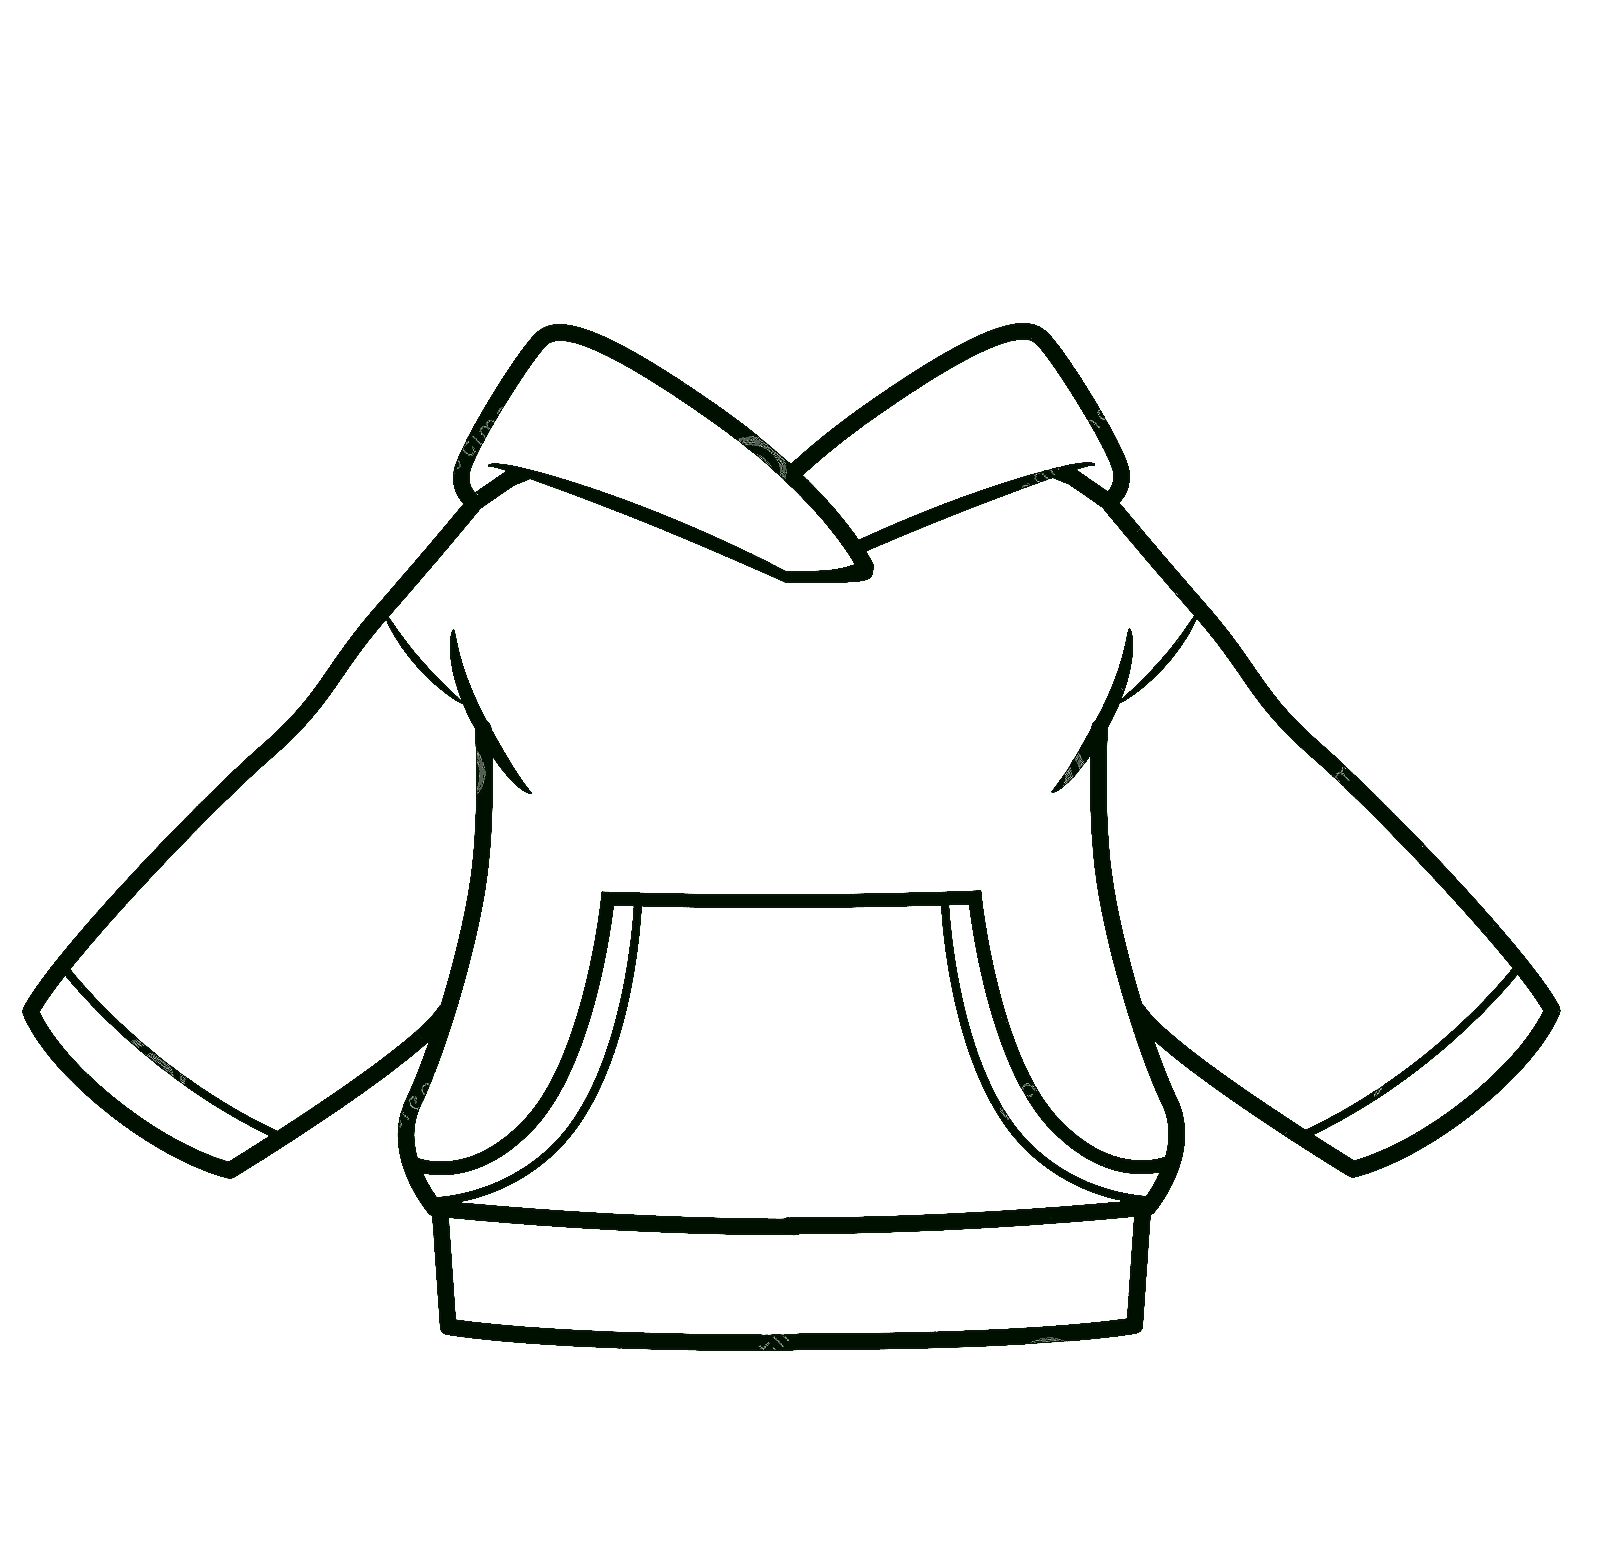 Hoodie With Pocket Outline For Coloring On A White